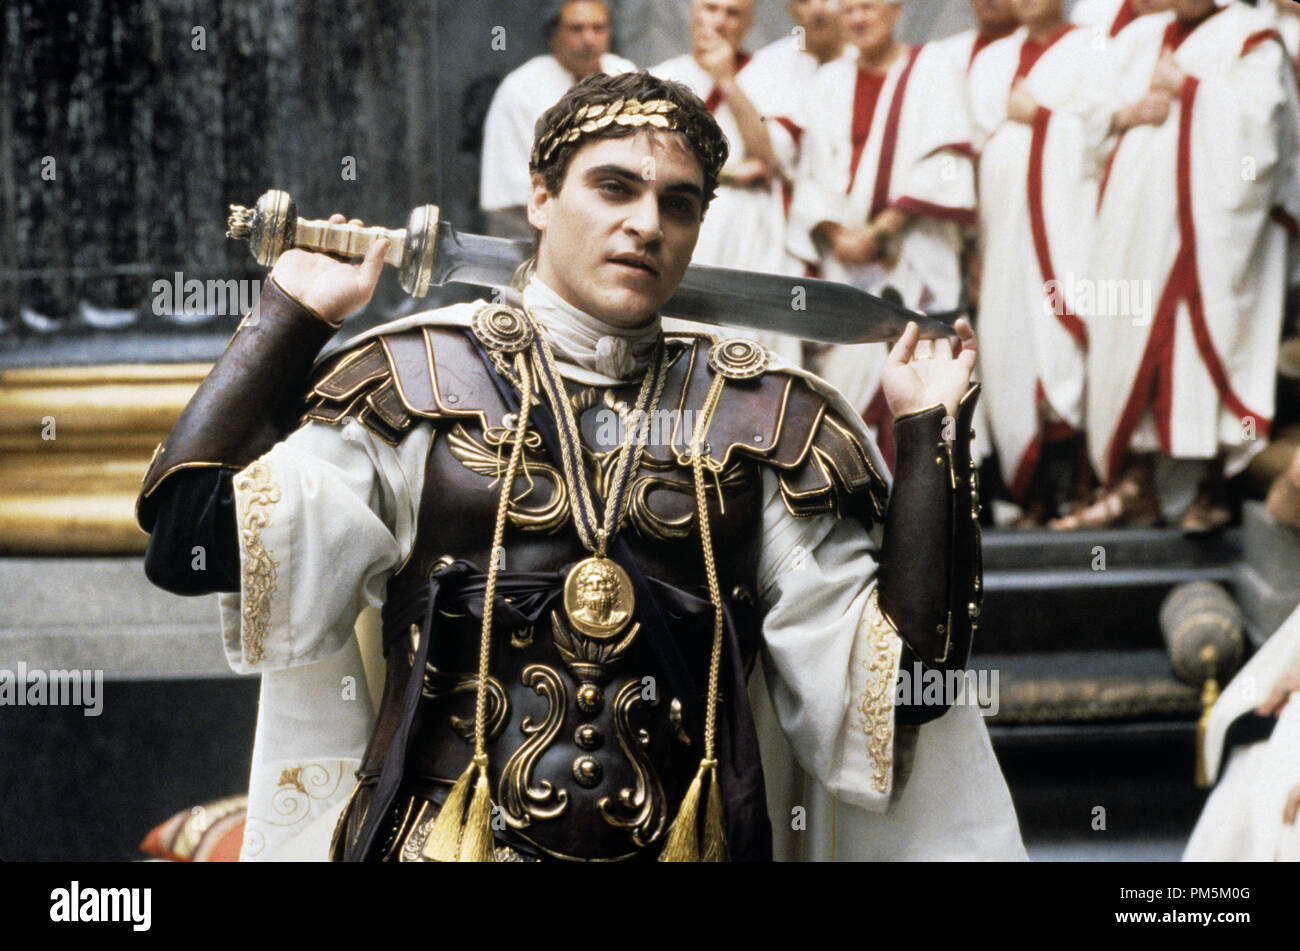 Film Still / Publicity Stills from 'Gladiator' Joaquin Phoenix © 2000 Universal  Photo Credit: Jaap Buitendijk  File Reference # 30846510THA  For Editorial Use Only -  All Rights Reserved Stock Photo